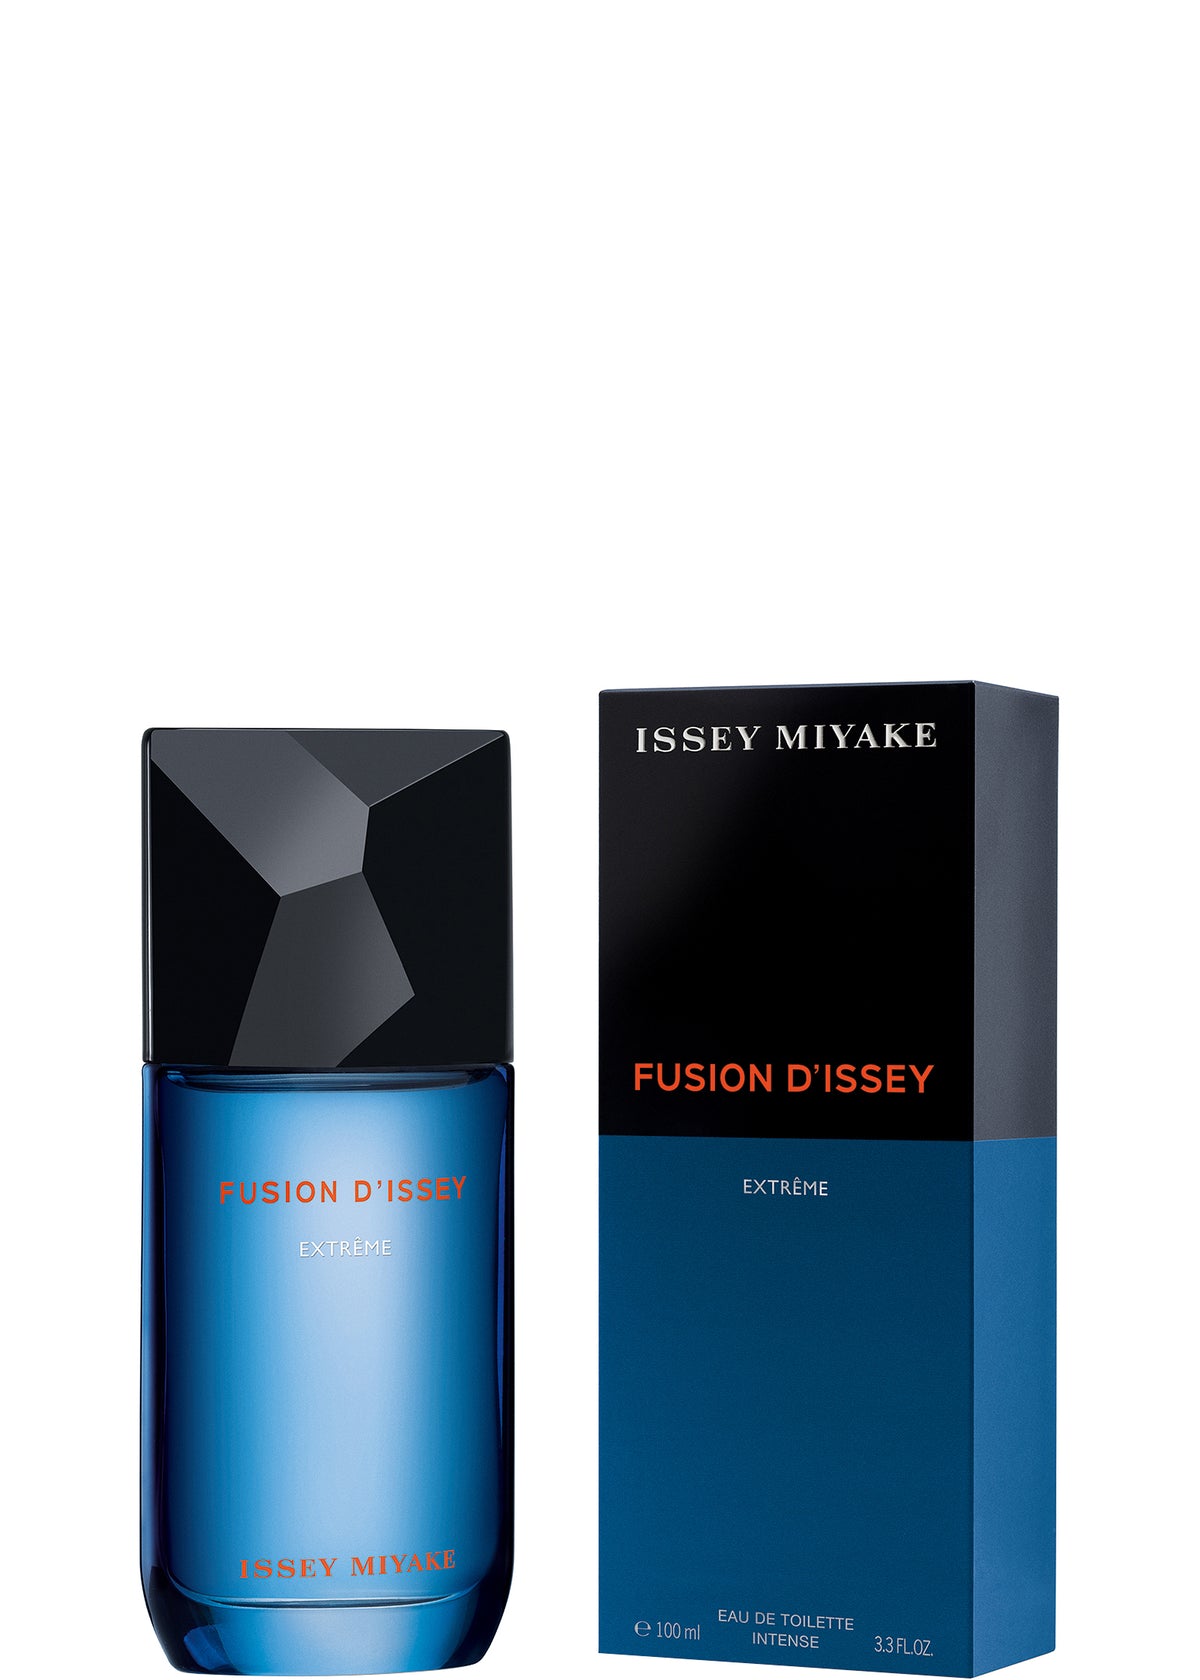 FUSION D'ISSEY EXTREME EAU DE TOILETTE INTENSE、アクセサリー&その他_フレグランス、ディテール画像1